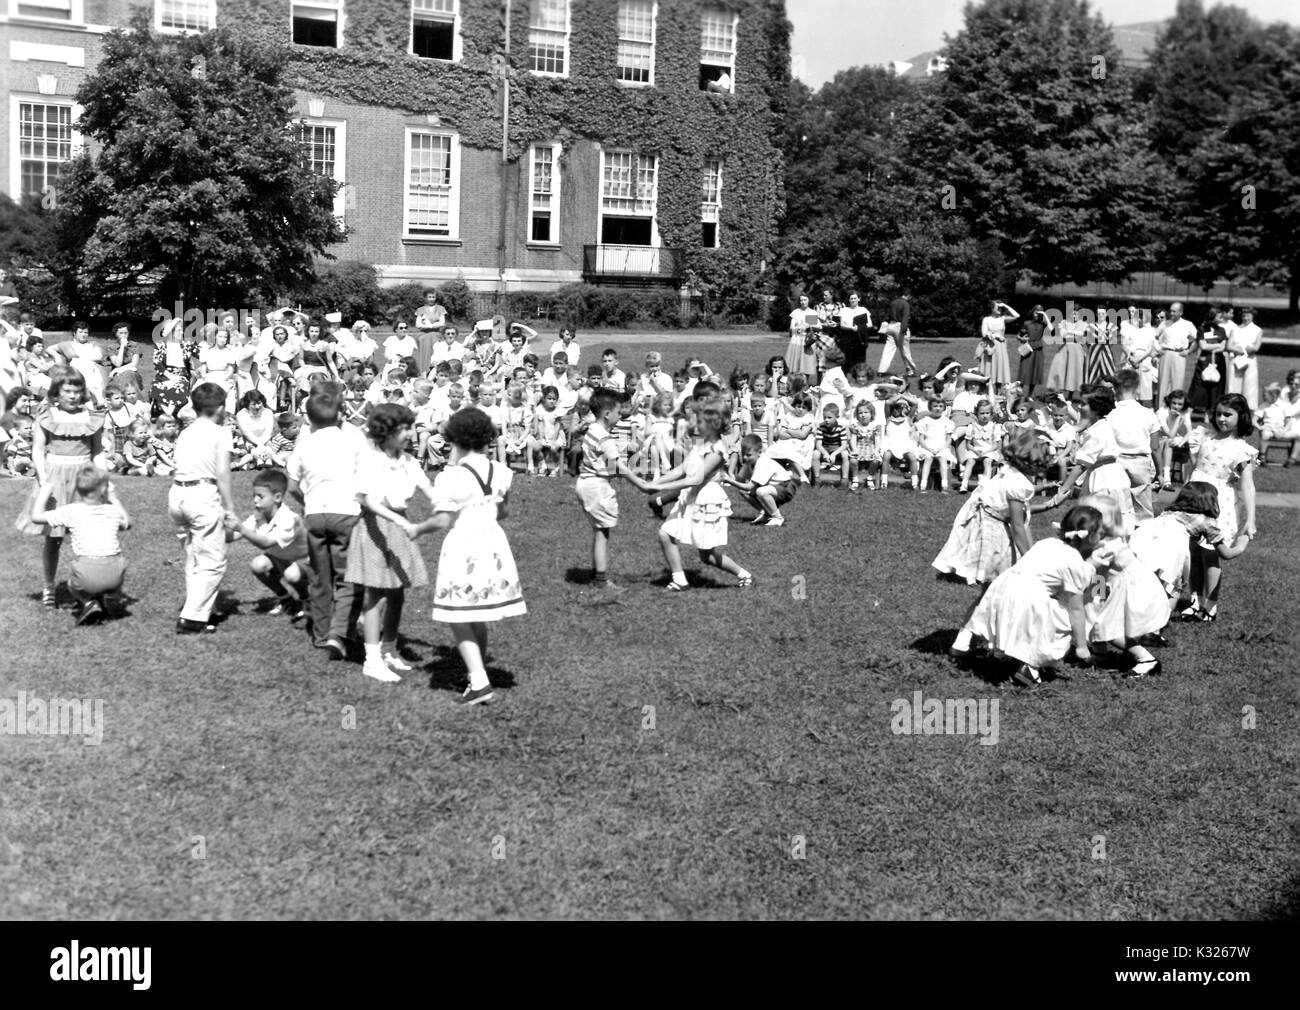 At the end of the school year for a demonstration school at Johns Hopkins University, young boys and girls put on a show in the grass on a sunny day, happily skipping and holding hands in front of an audience made up of classmates, teachers, and parents sitting and standing outside of an ivy-covered campus building, Baltimore, Maryland, June, 1950. Stock Photo